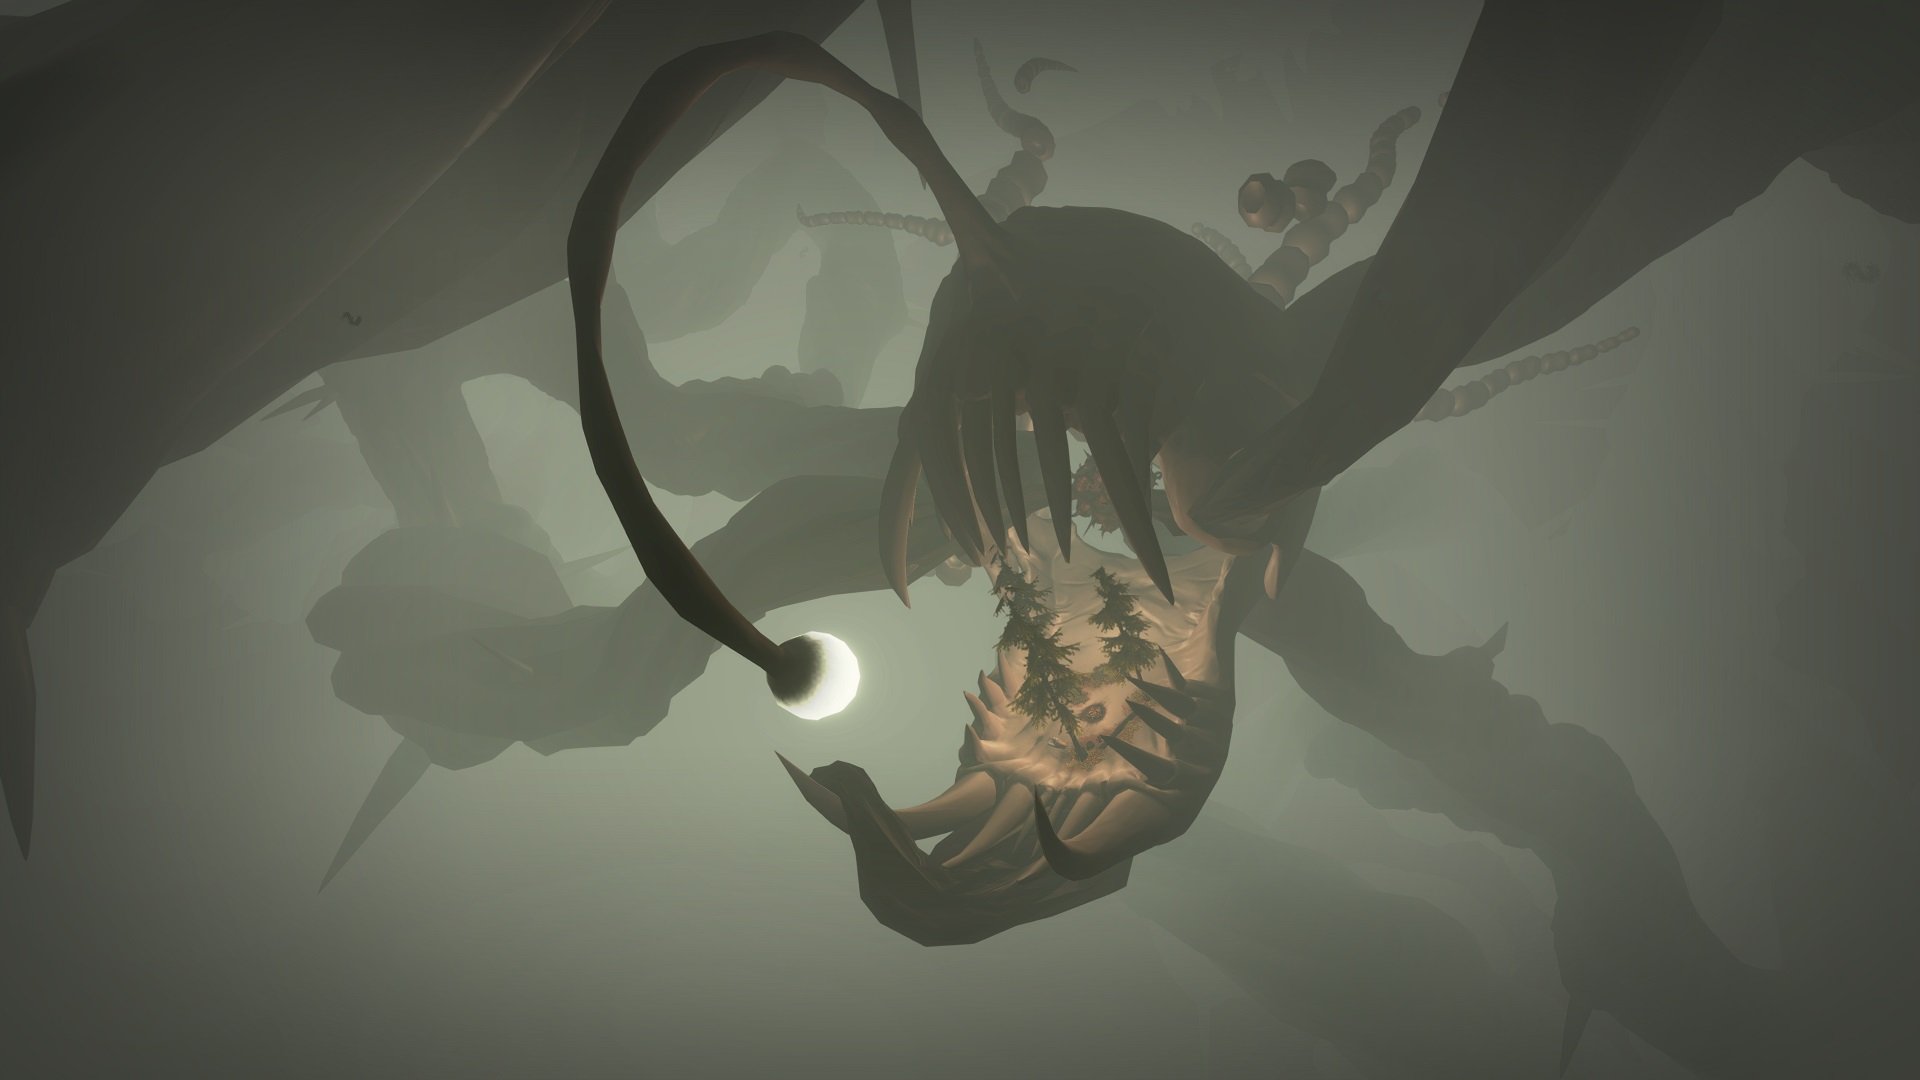 Outer Wilds: Every Ending And How To Get Them